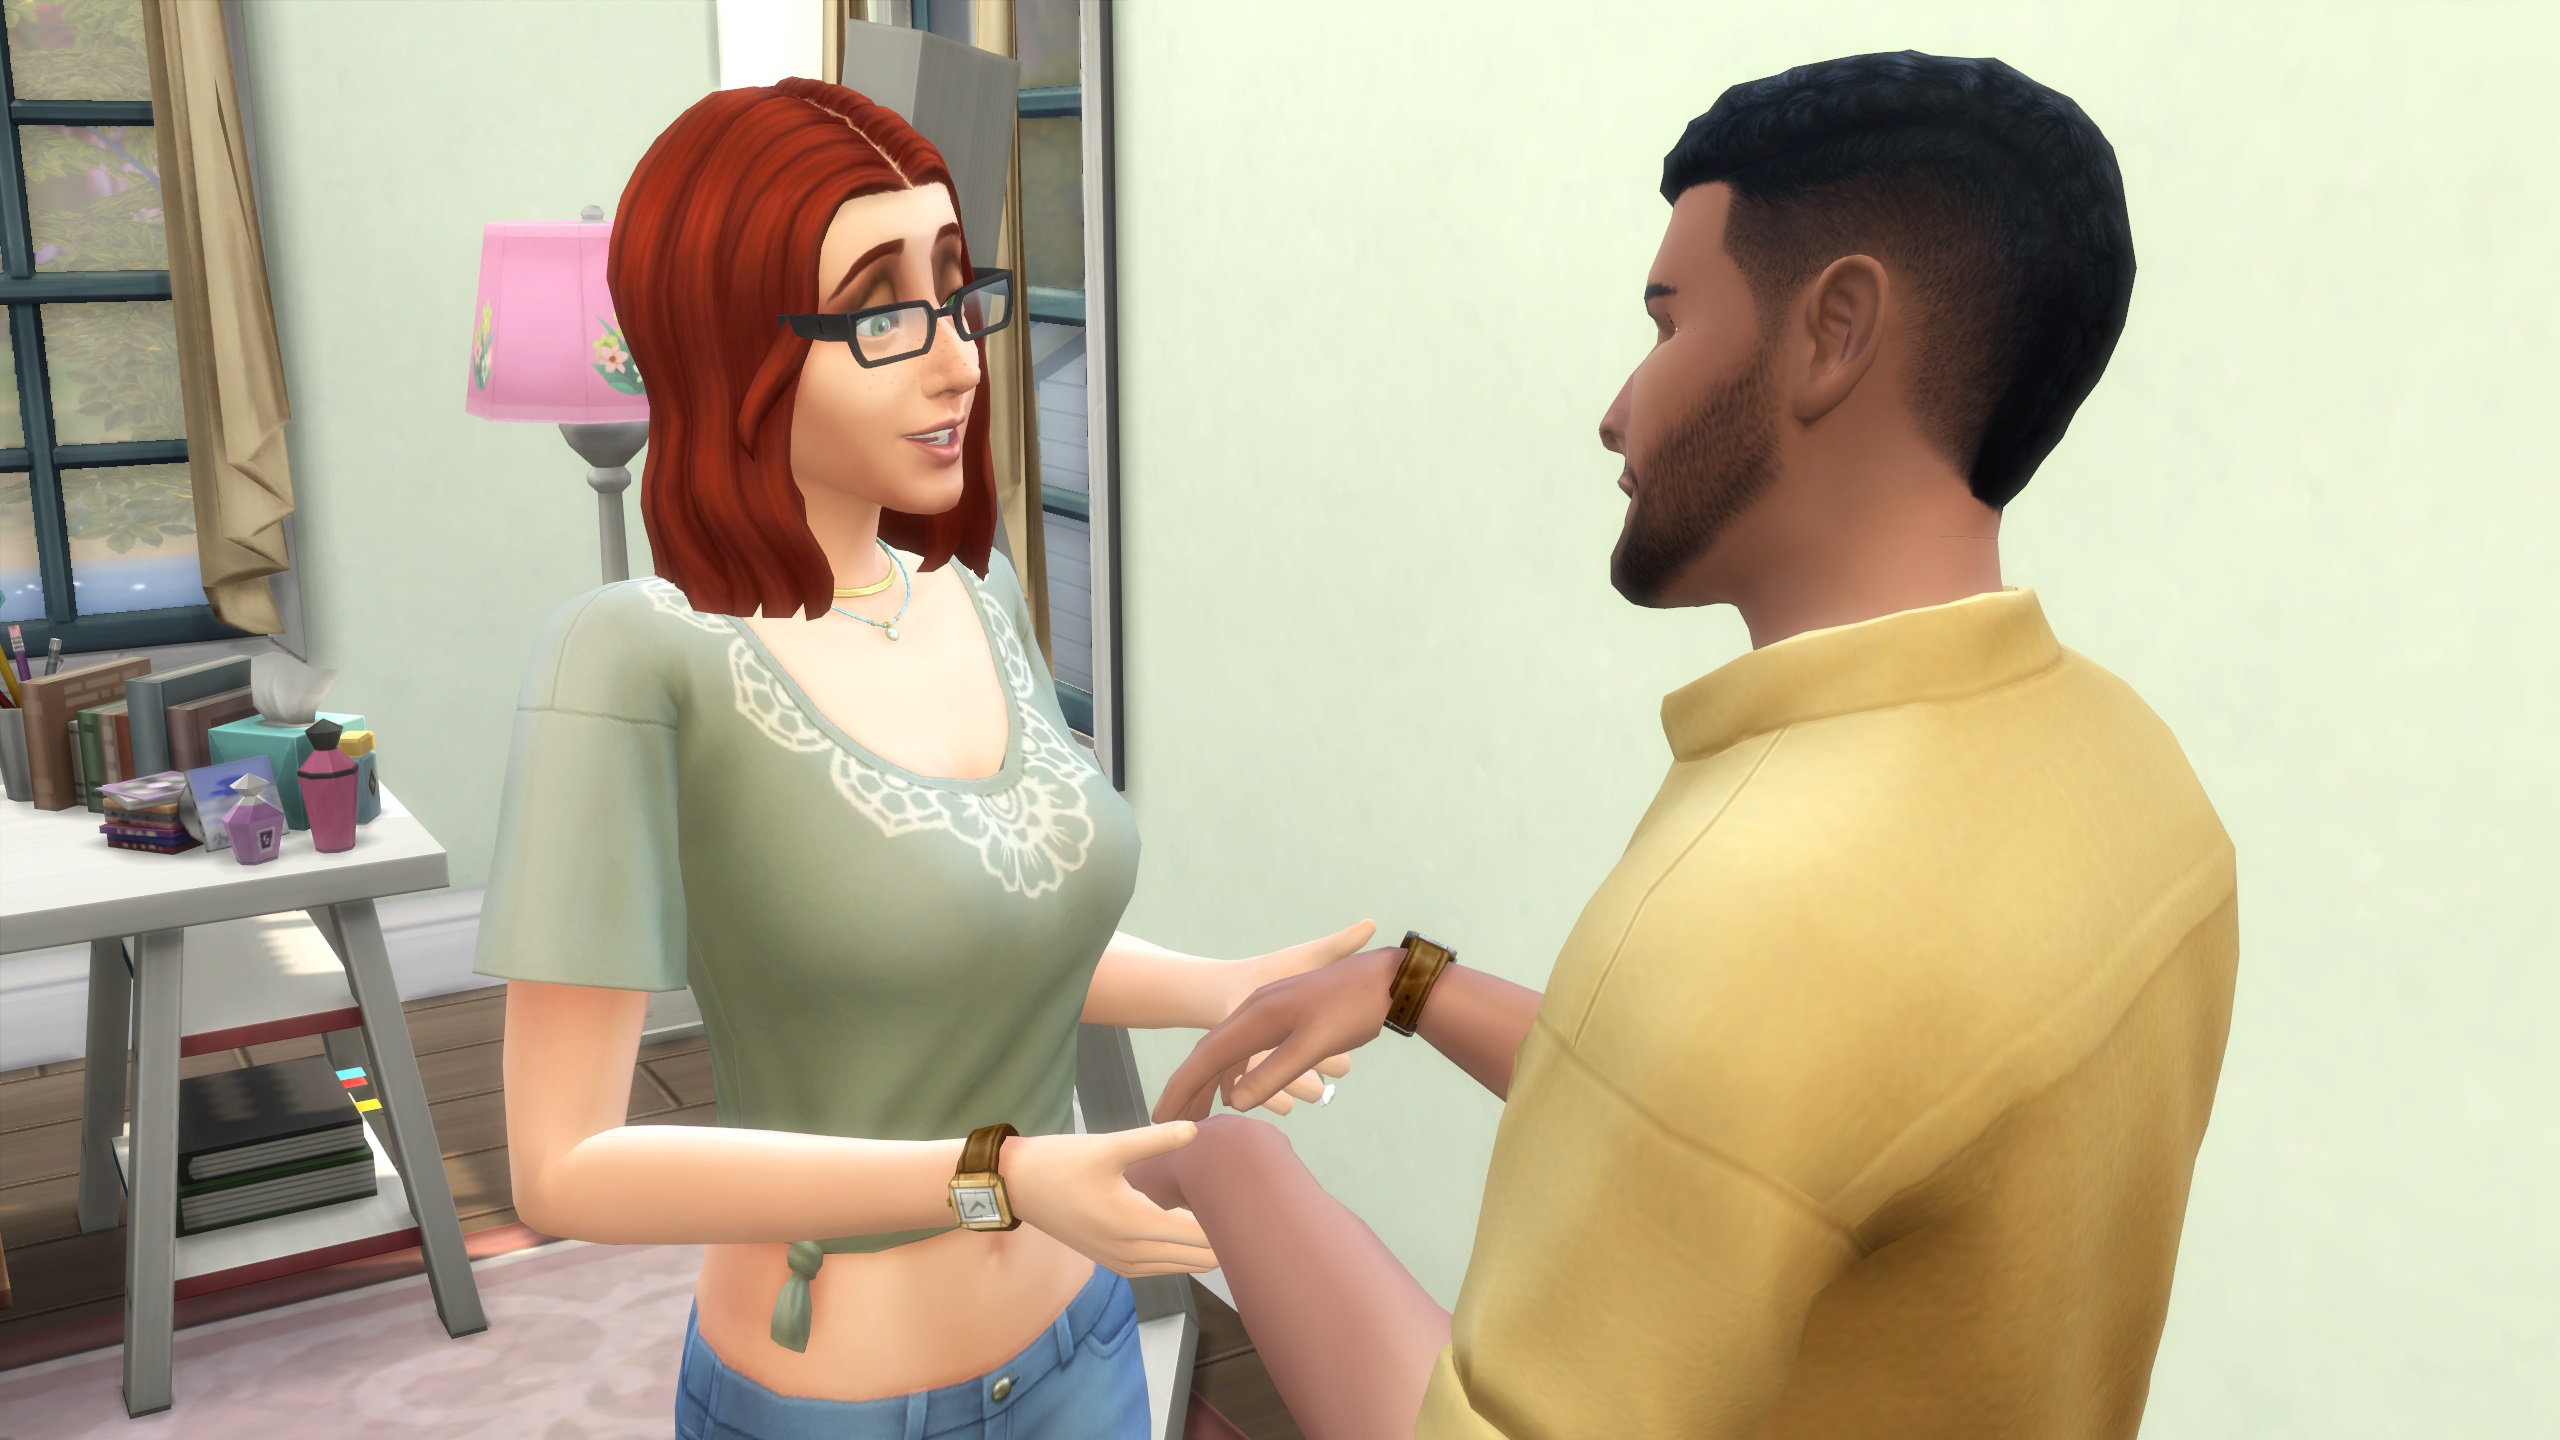 The Sims 4 - Bob and Eliza Pancakes hold hands lovingly.